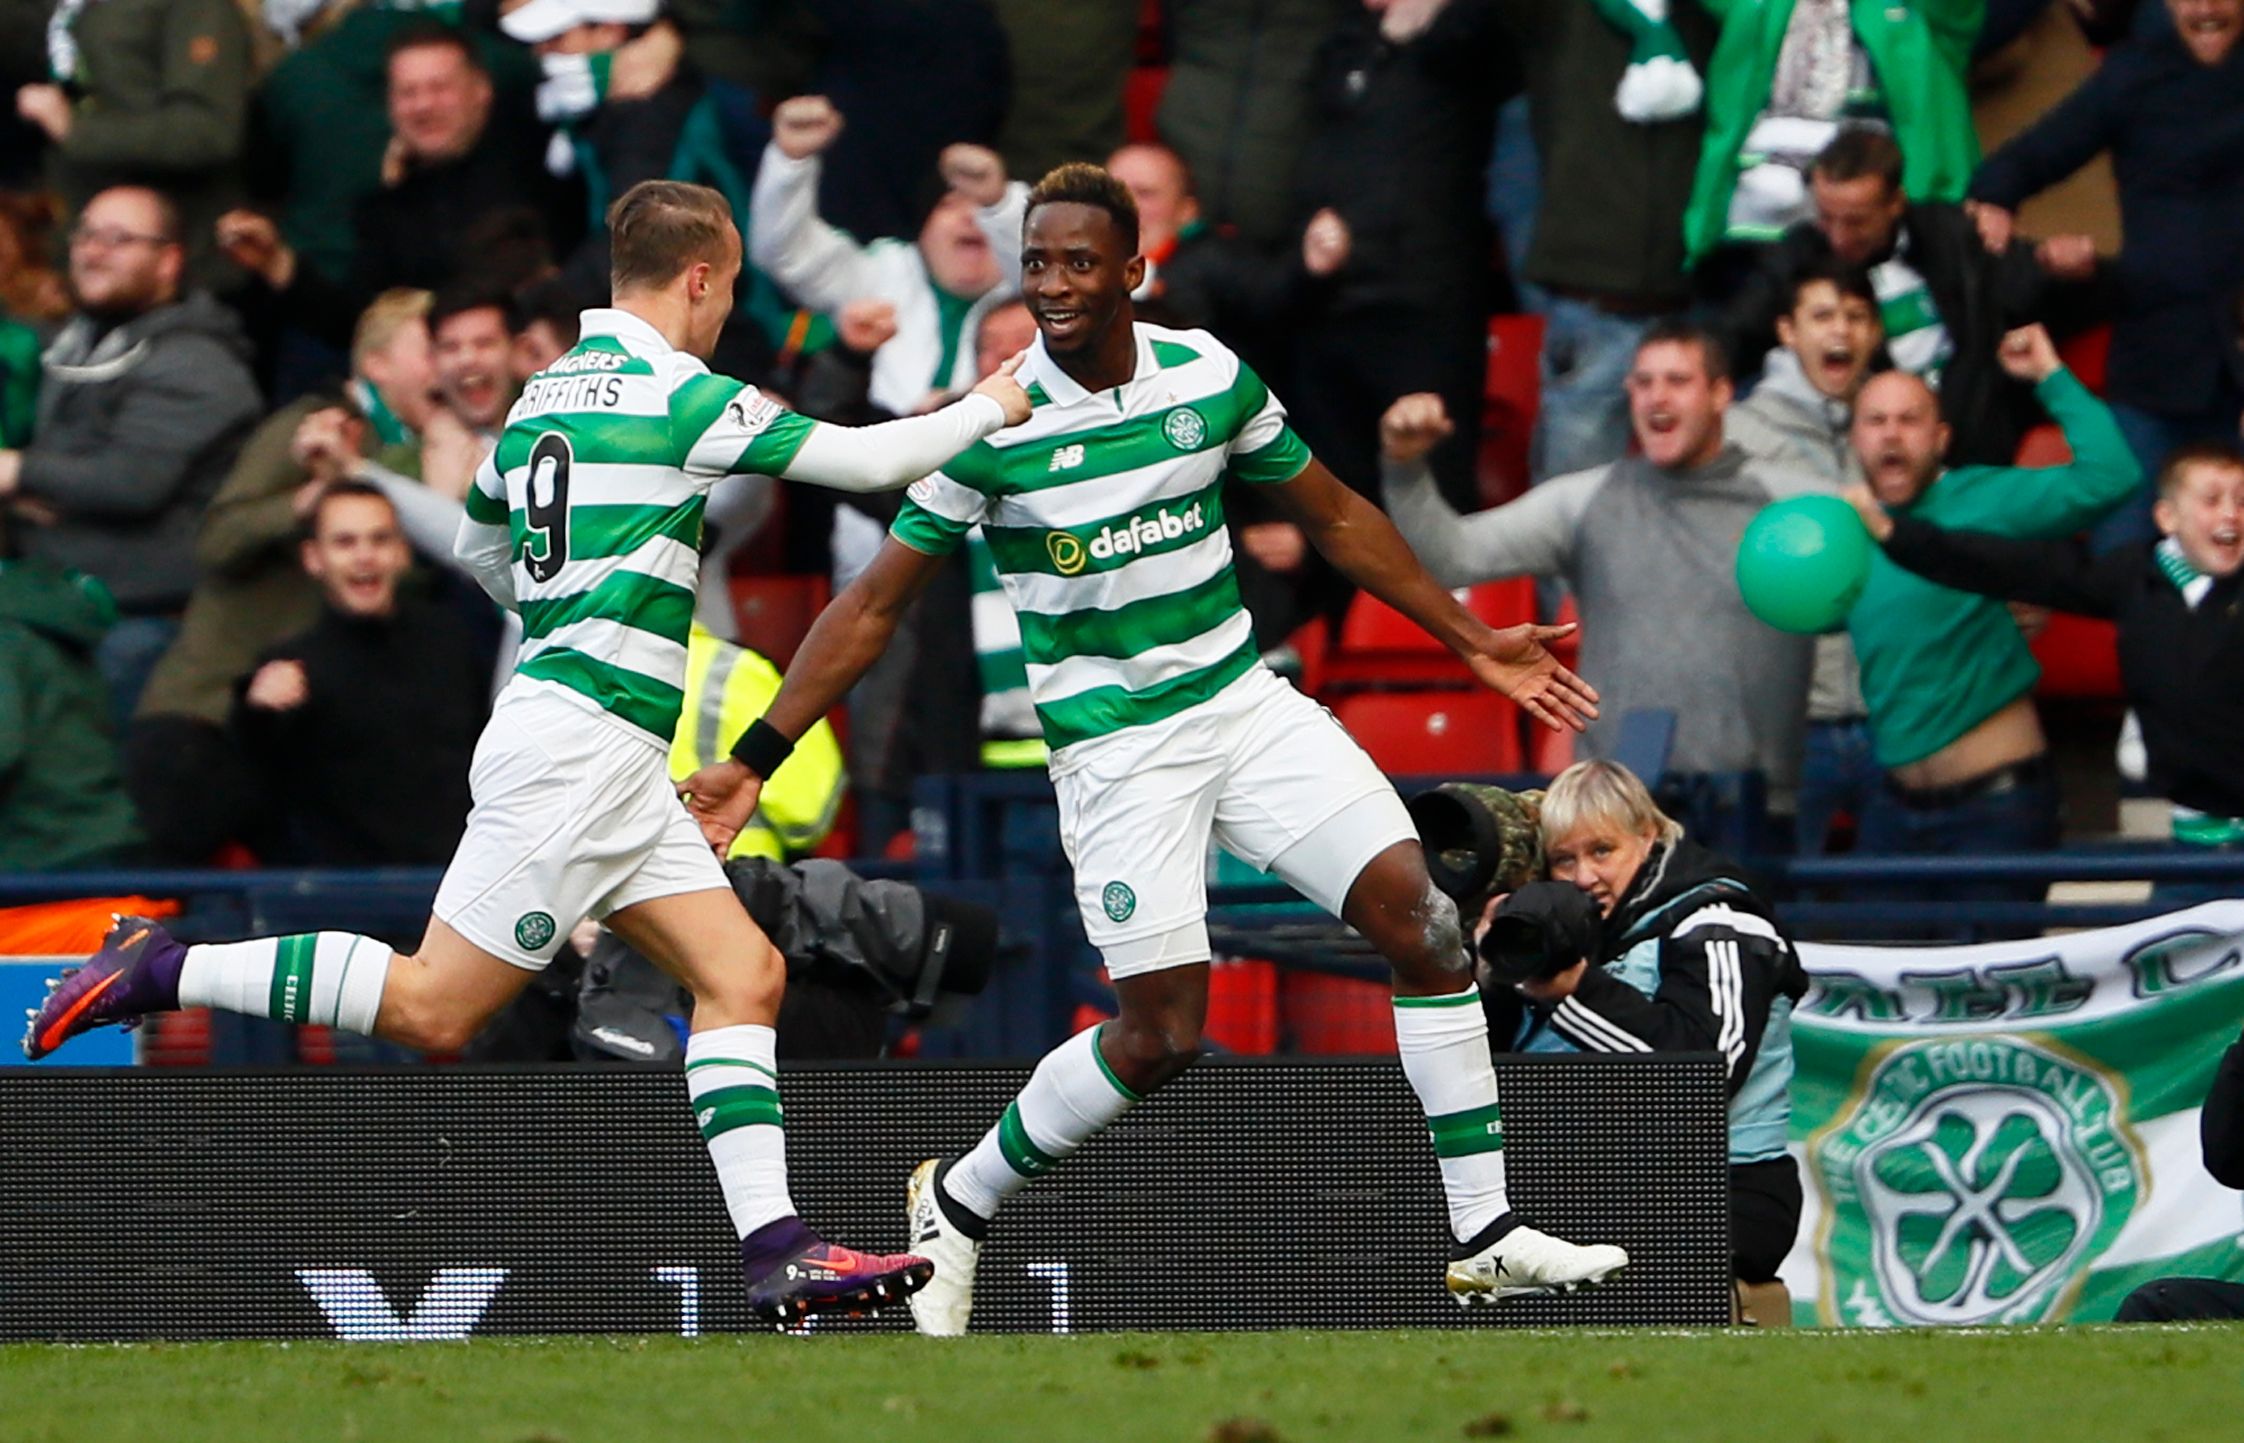 Britain Soccer Football - Celtic v Rangers - Scottish League Cup Semi Final - Hampden Park, Glasgow, Scotland - 23/10/16
Celtic's Moussa Dembele celebrates scoring their first goal 
Action Images via Reuters / Jason Cairnduff
Livepic
EDITORIAL USE ONLY. No use with unauthorized audio, video, data, fixture lists, club/league logos or 